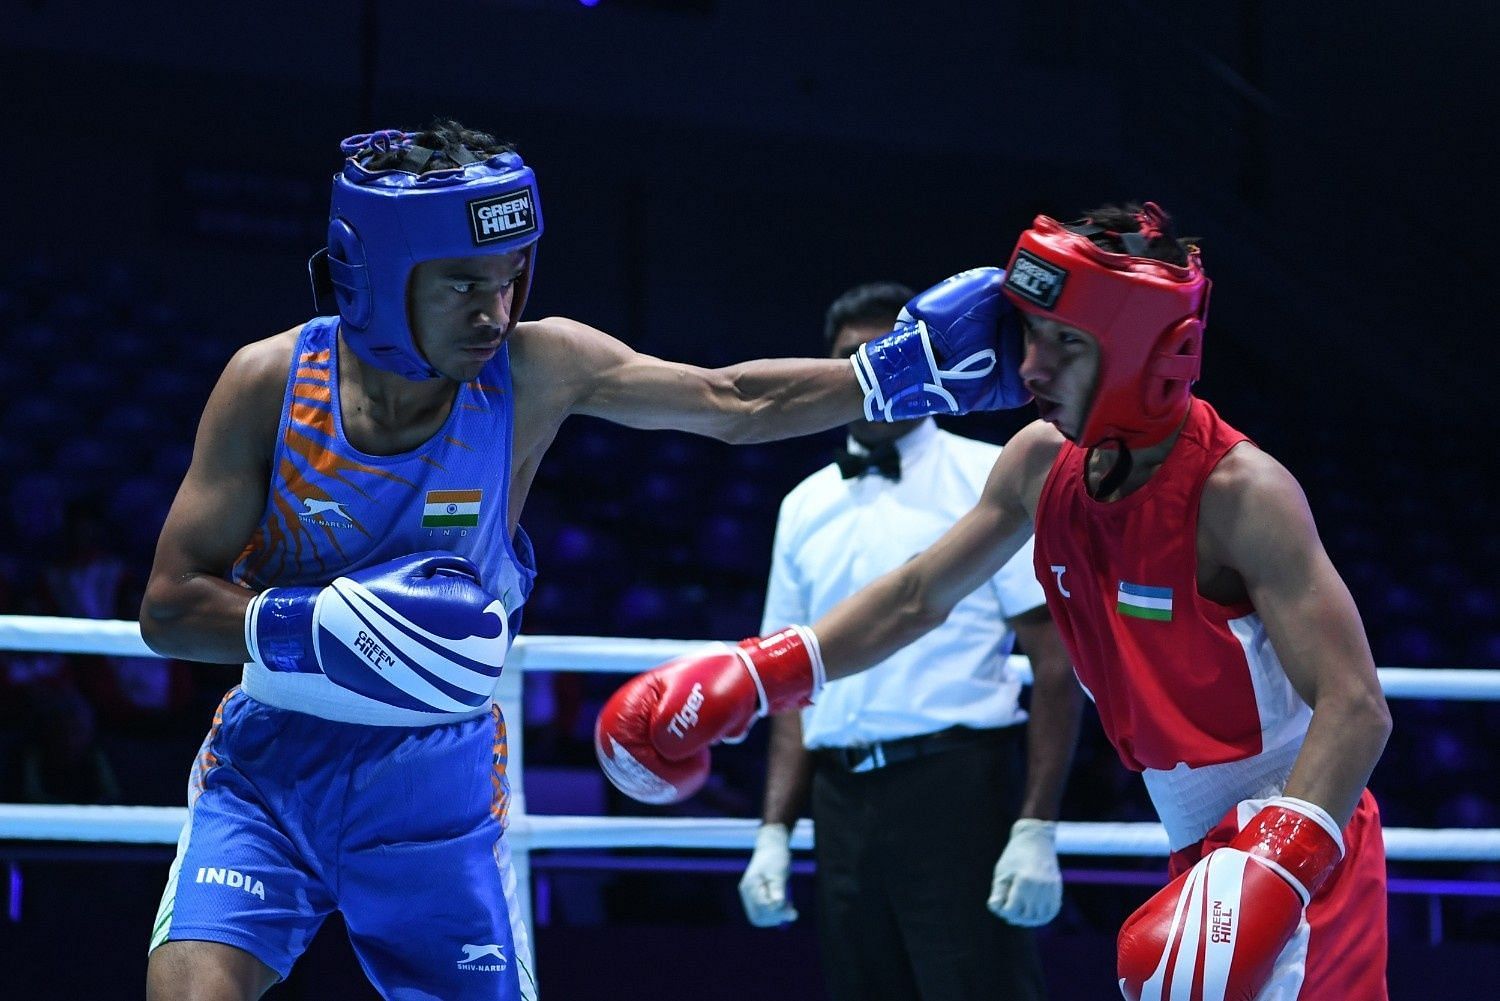 Indian youth boxers shine at ASBC Asian U-22 &amp; Youth Boxing Championships (Source: Press Release)